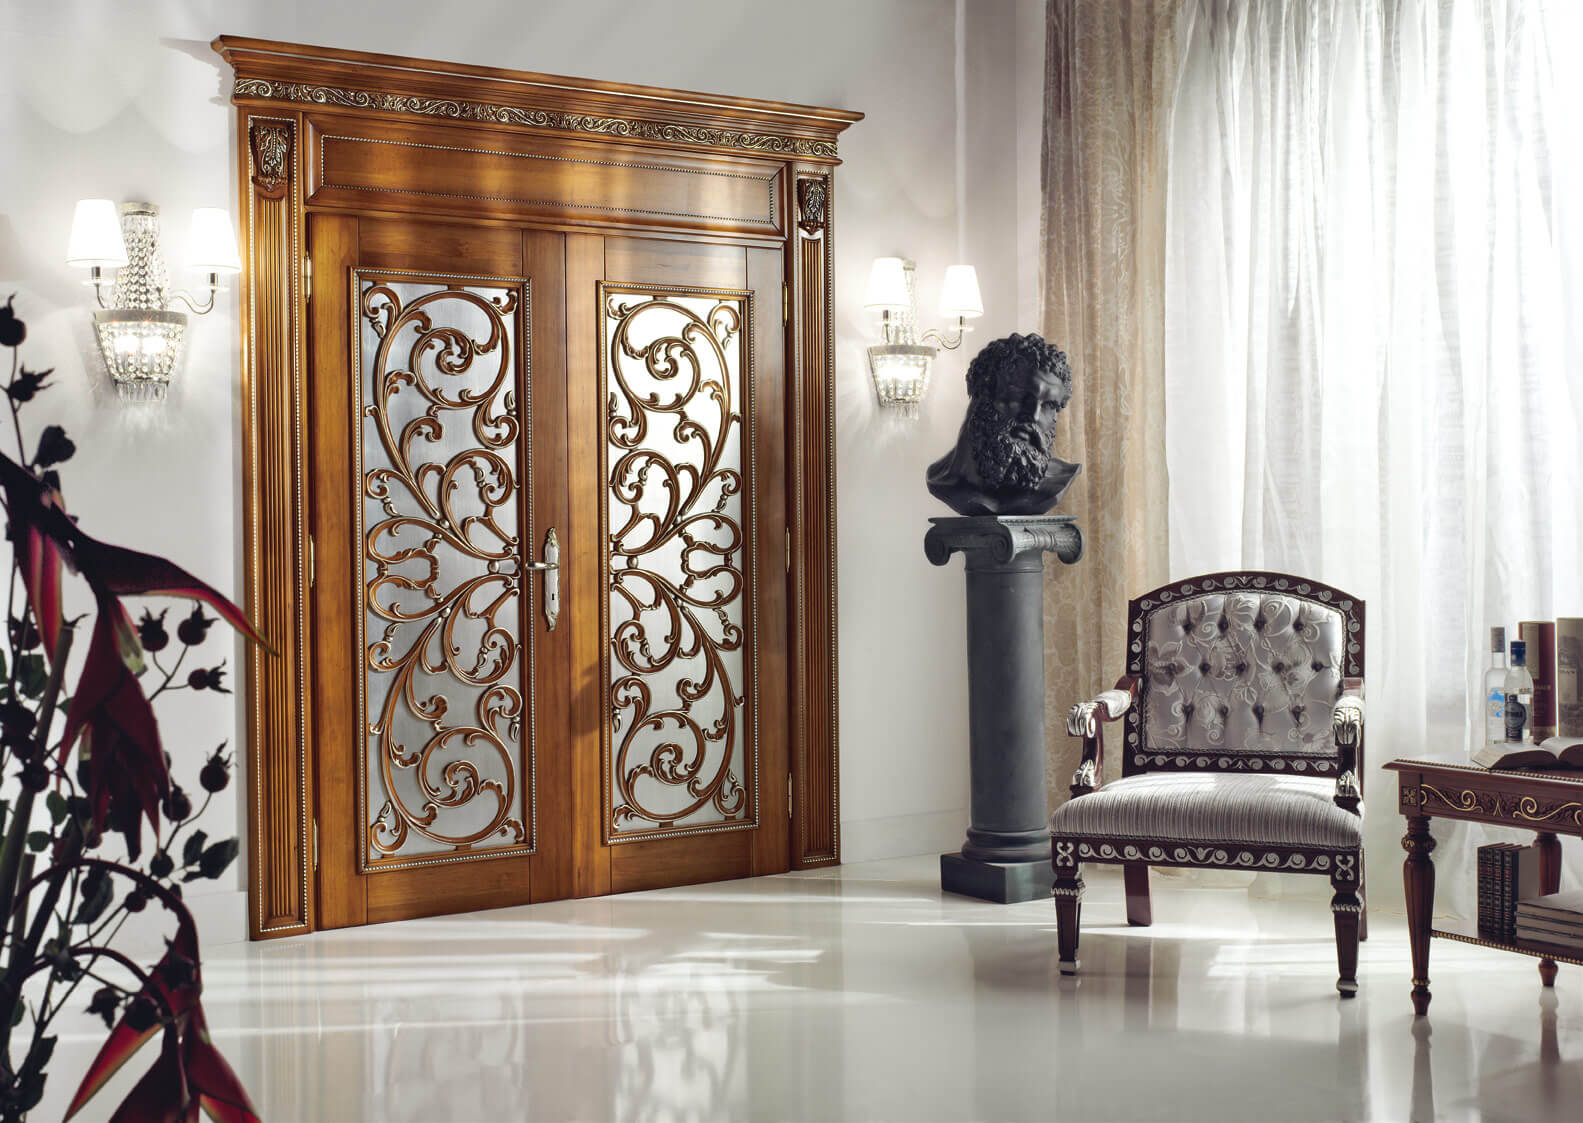 A photo of custom double security doors at the entrance of a master bedroom in a luxury home.